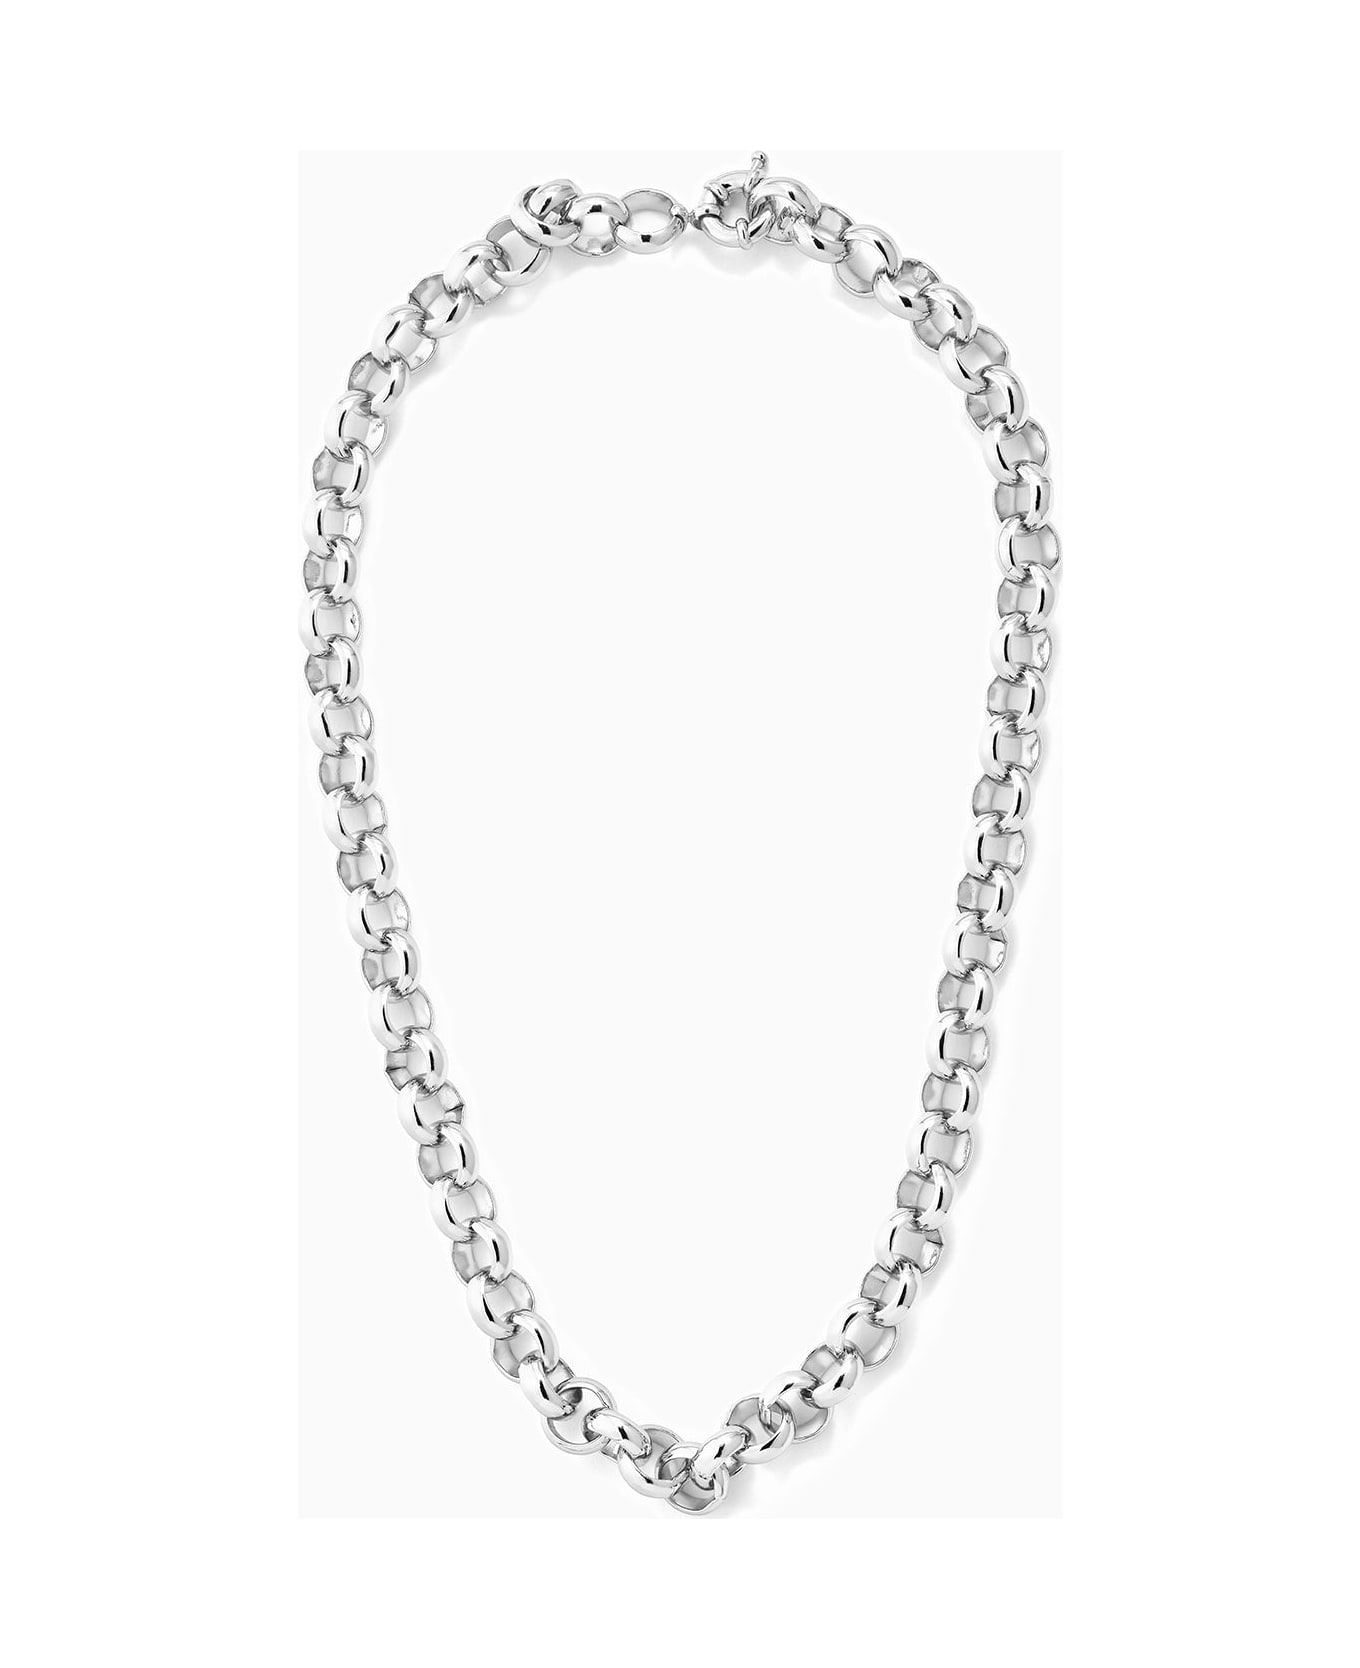 Federica Tosi Lace Irma Silver - SILVER ネックレス